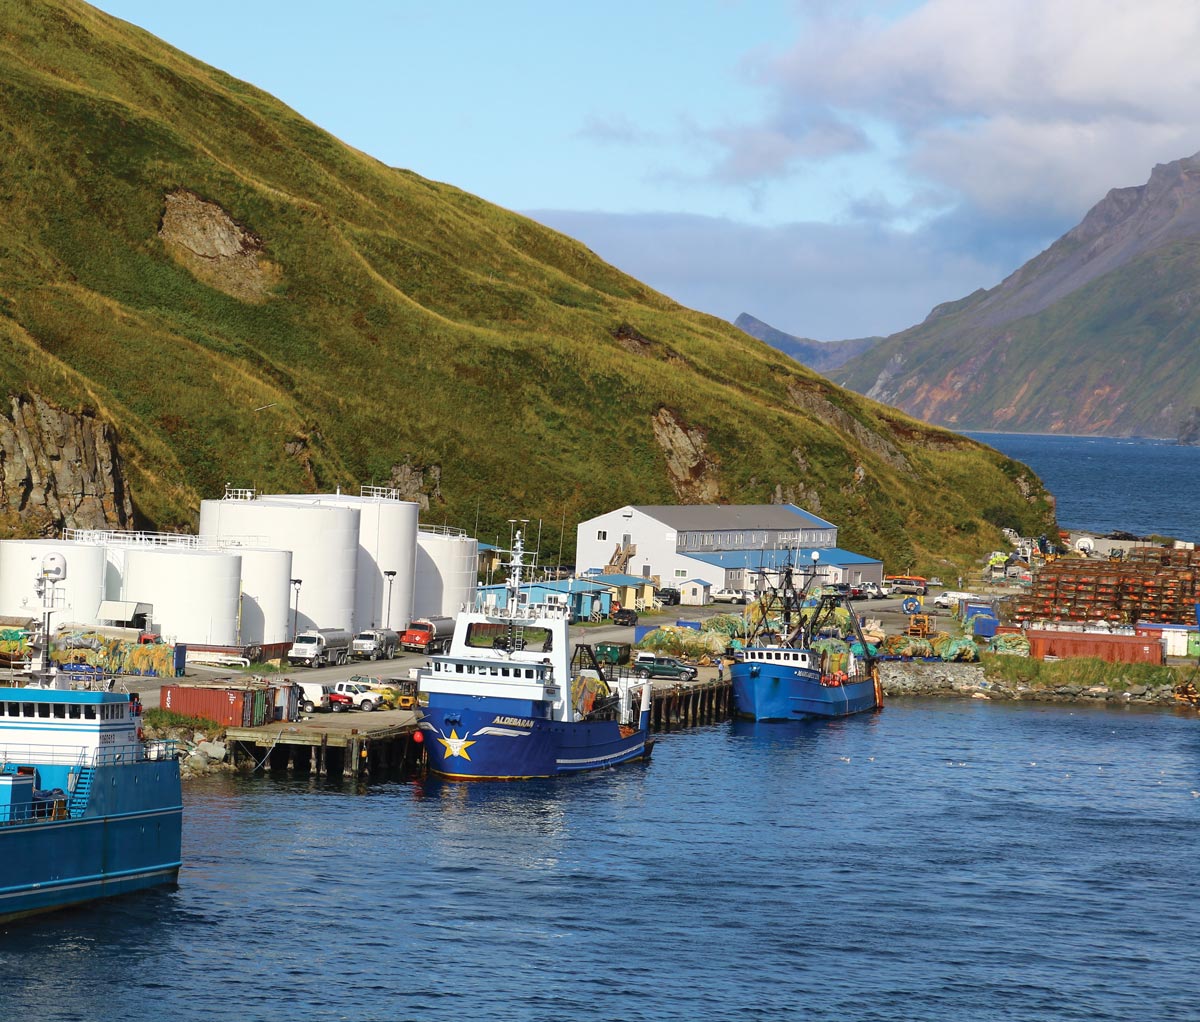 Dutch Harbor serves as a fuel hub for the Aleutian Islands and Alaska Peninsula submarkets, accommodating distribution of fuel and lubricants to homes and businesses in Unalaska and beyond.